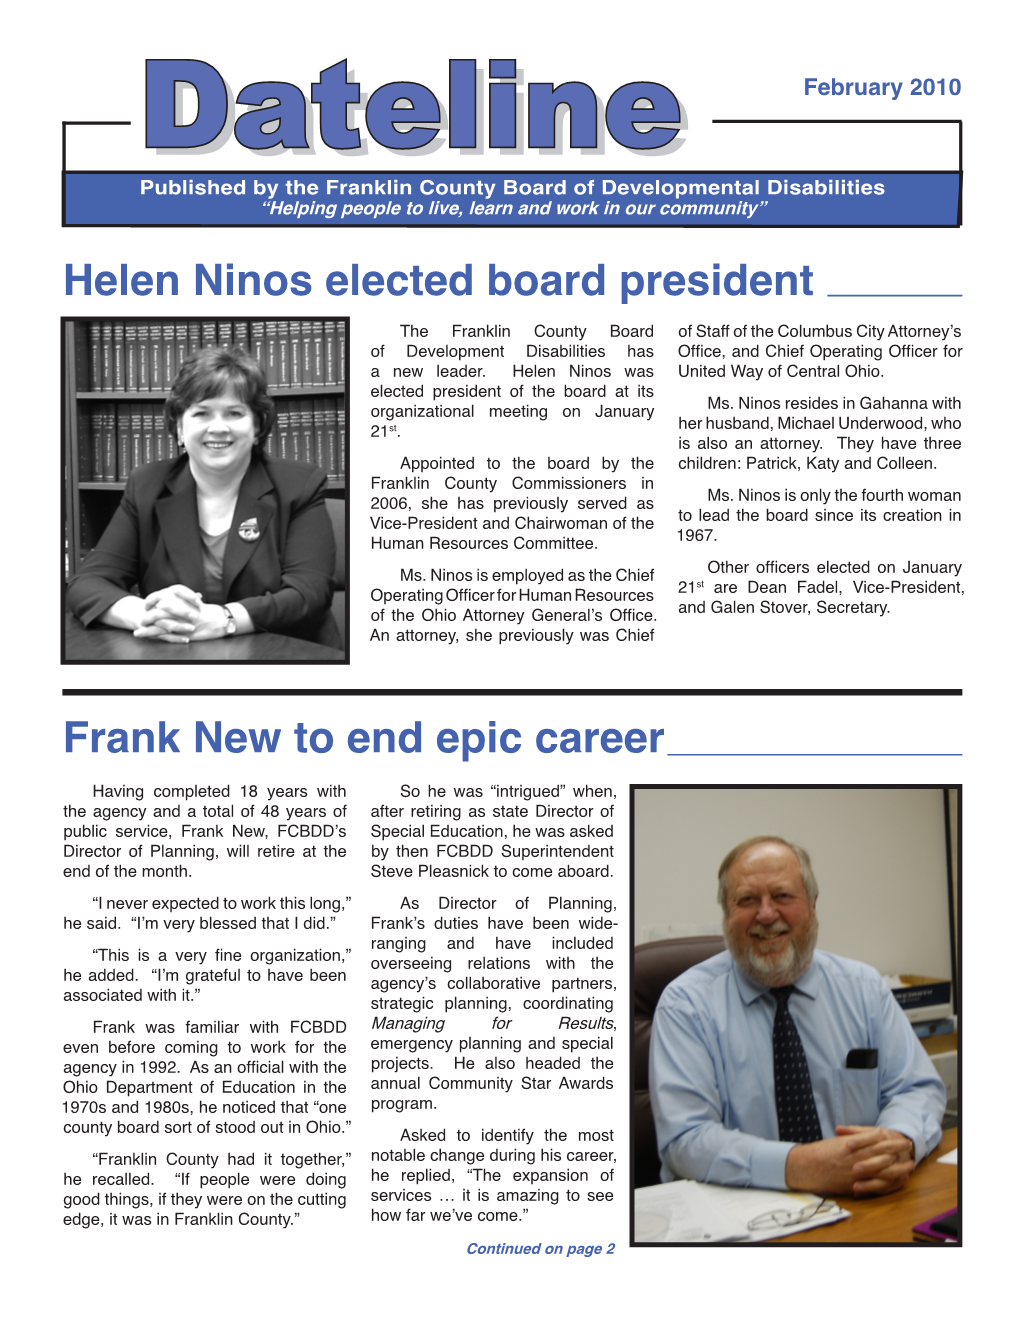 Helen Ninos Elected Board President Frank New to End Epic Career